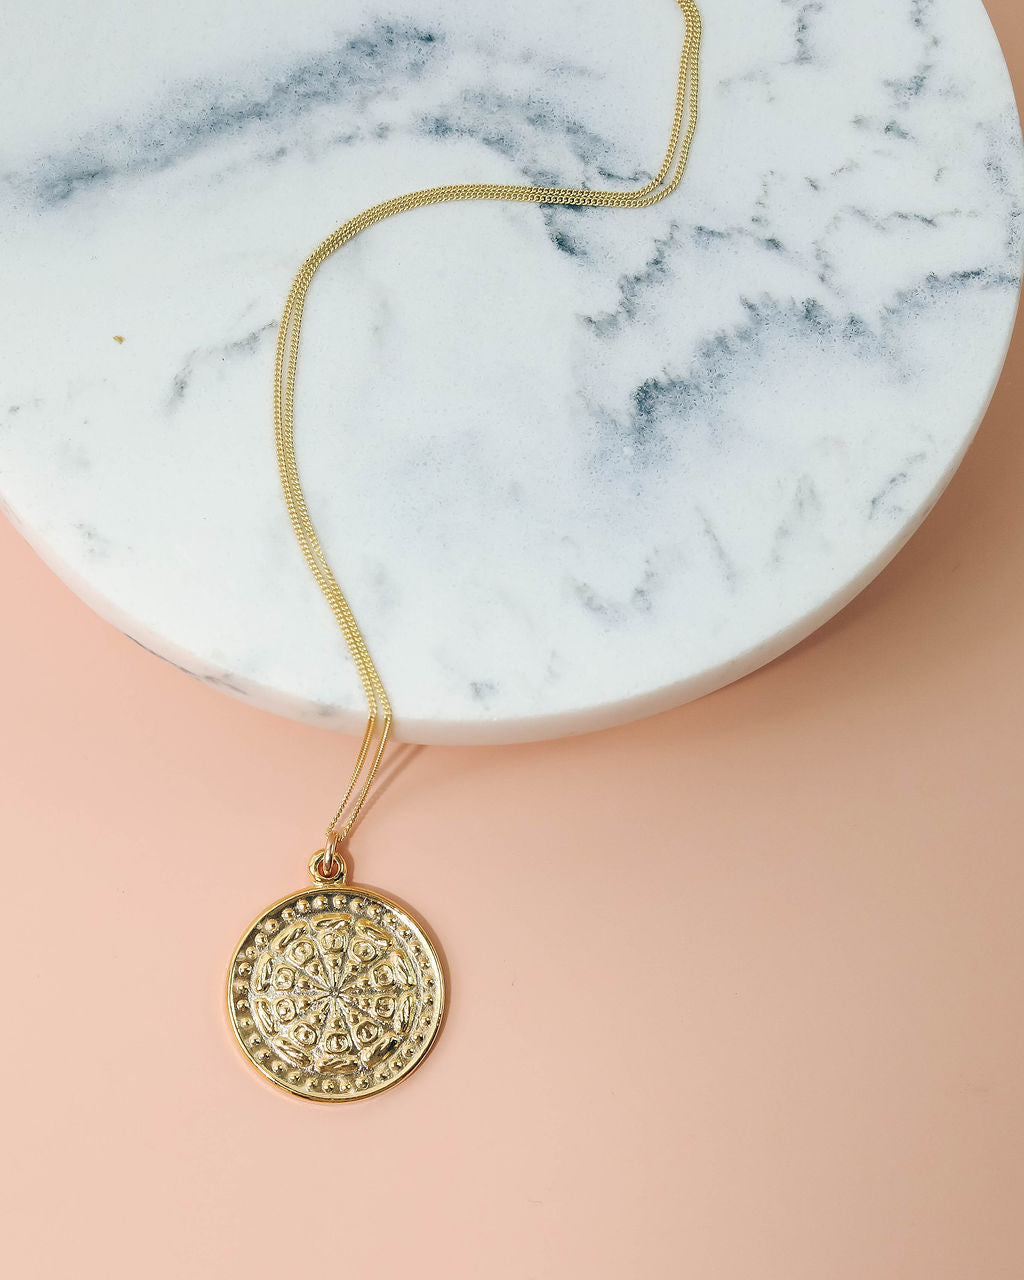 Meghan Bo Designs - The Buddha Wheel Necklace - Gold Ins Street